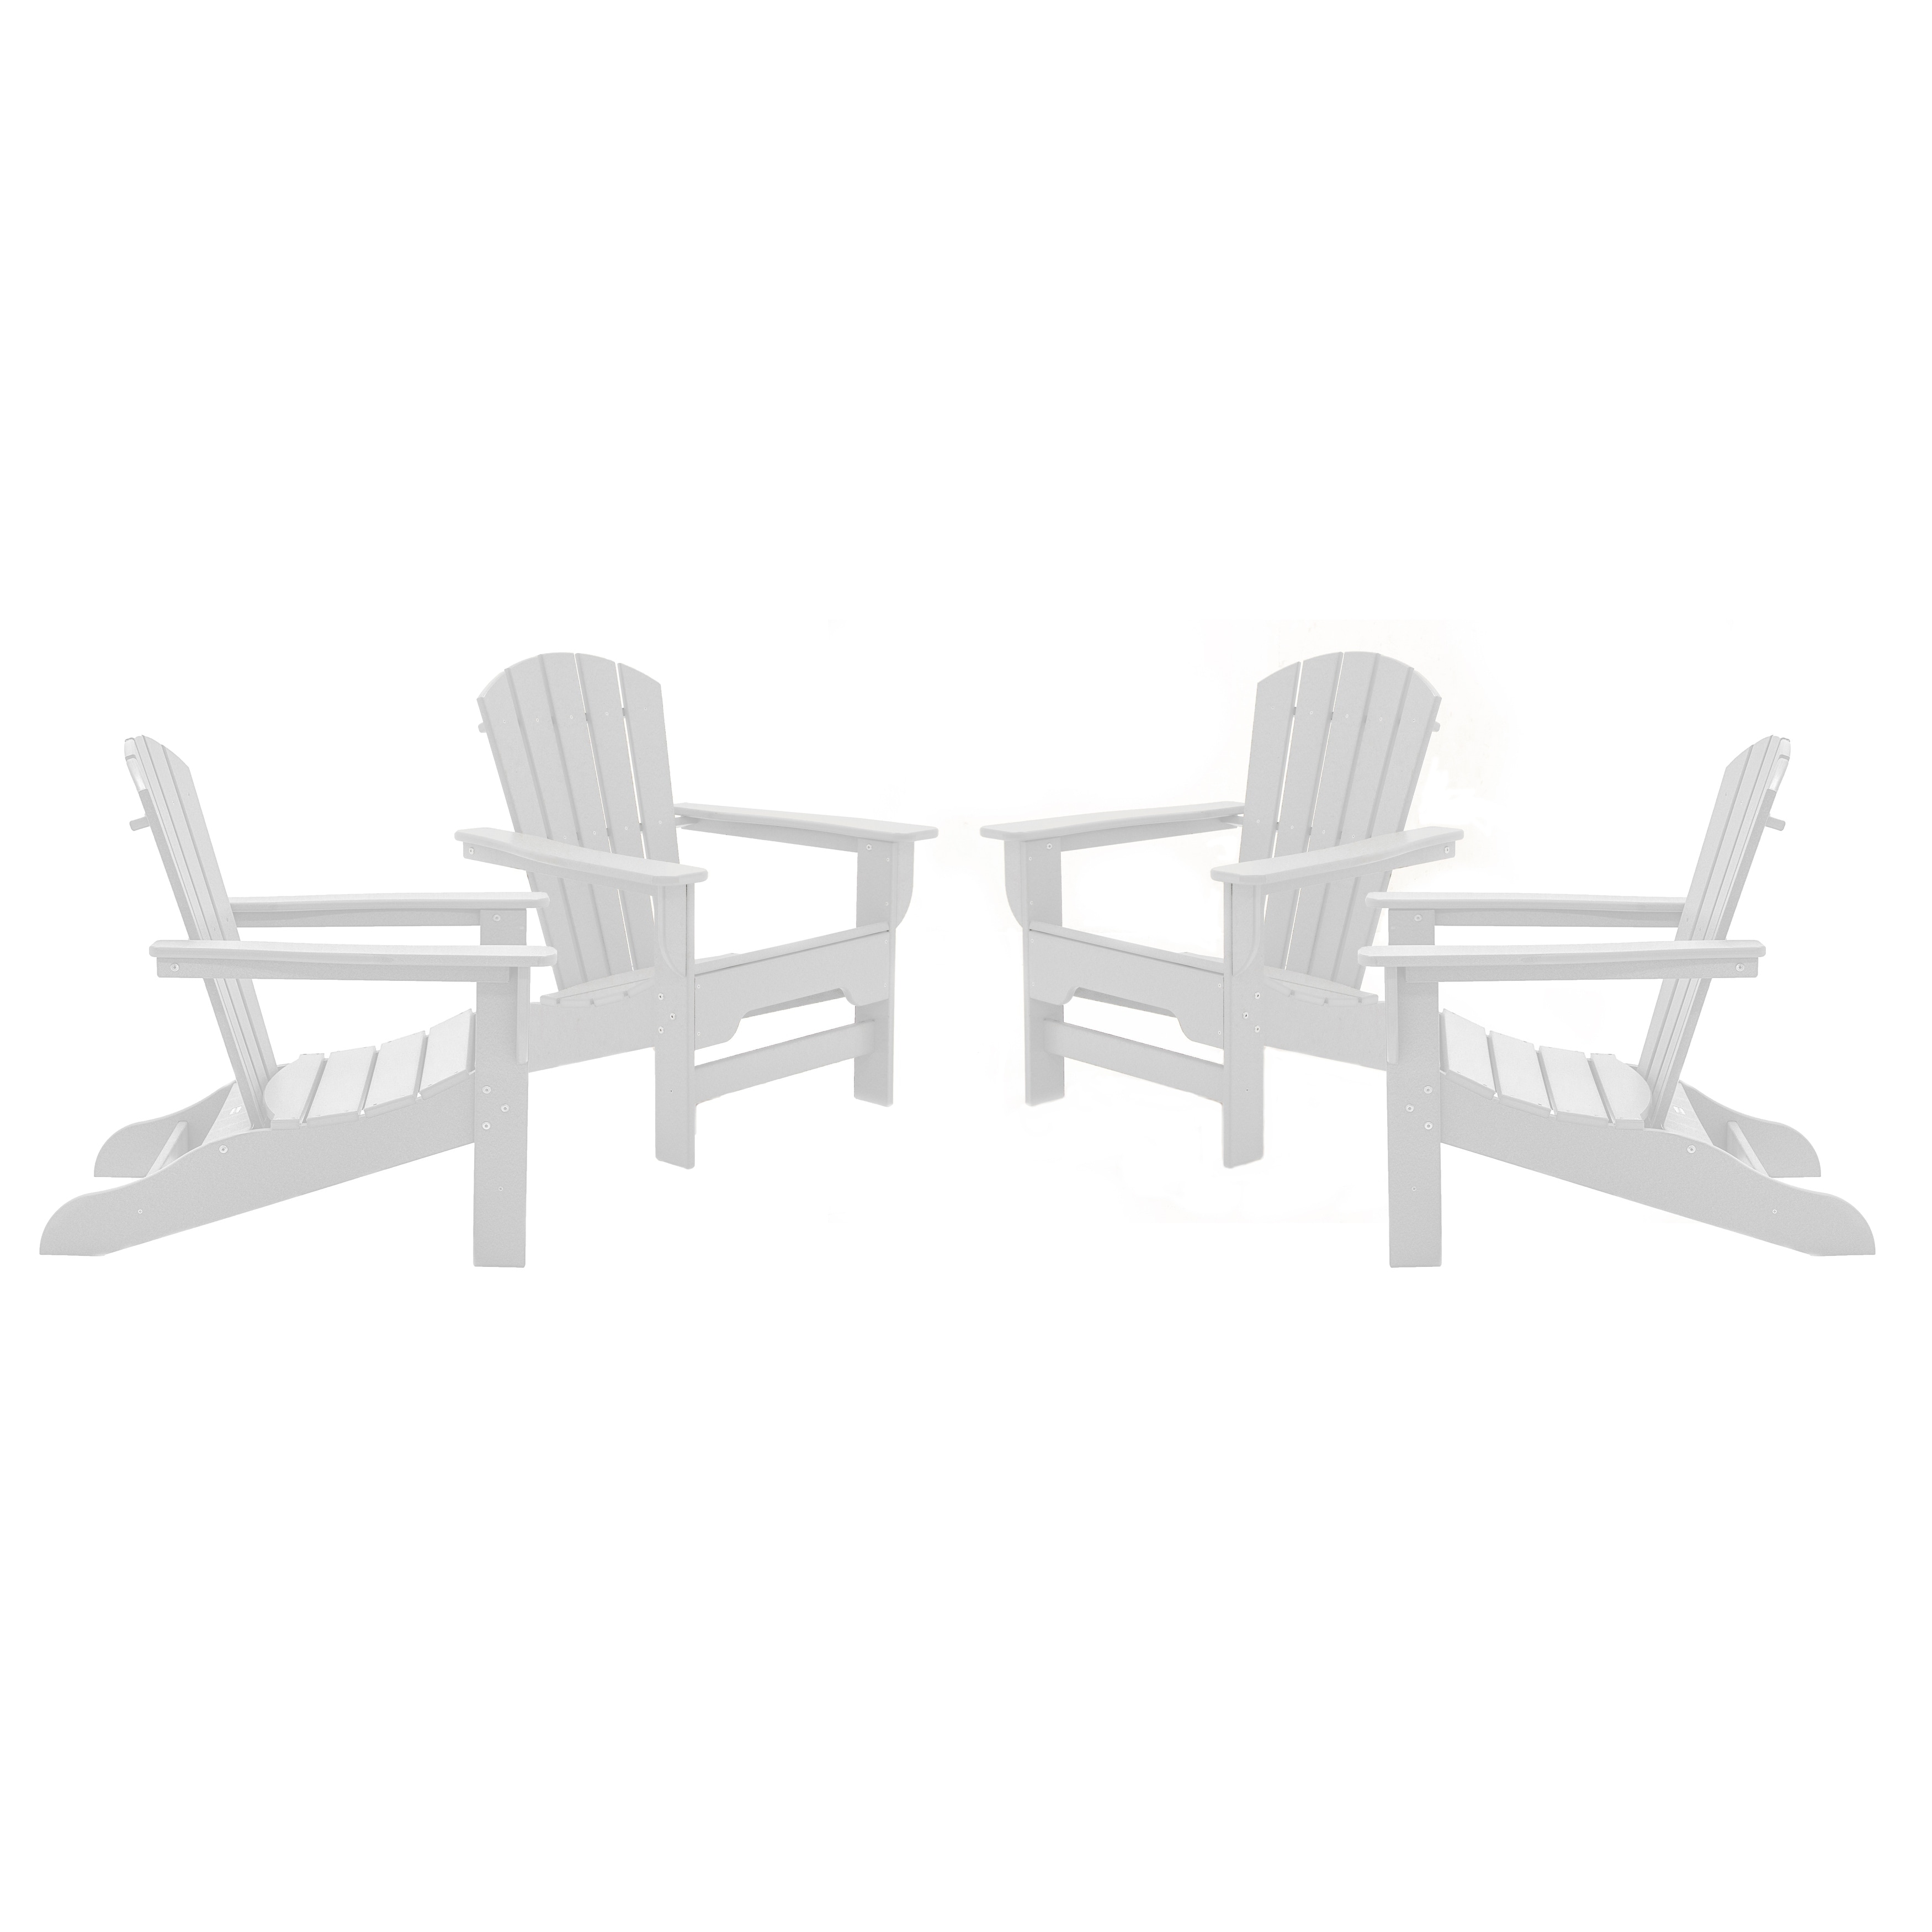 Hawkesbury 4-piece Recycled Plastic Fanback Adirondack Chair Set By Havenside Home